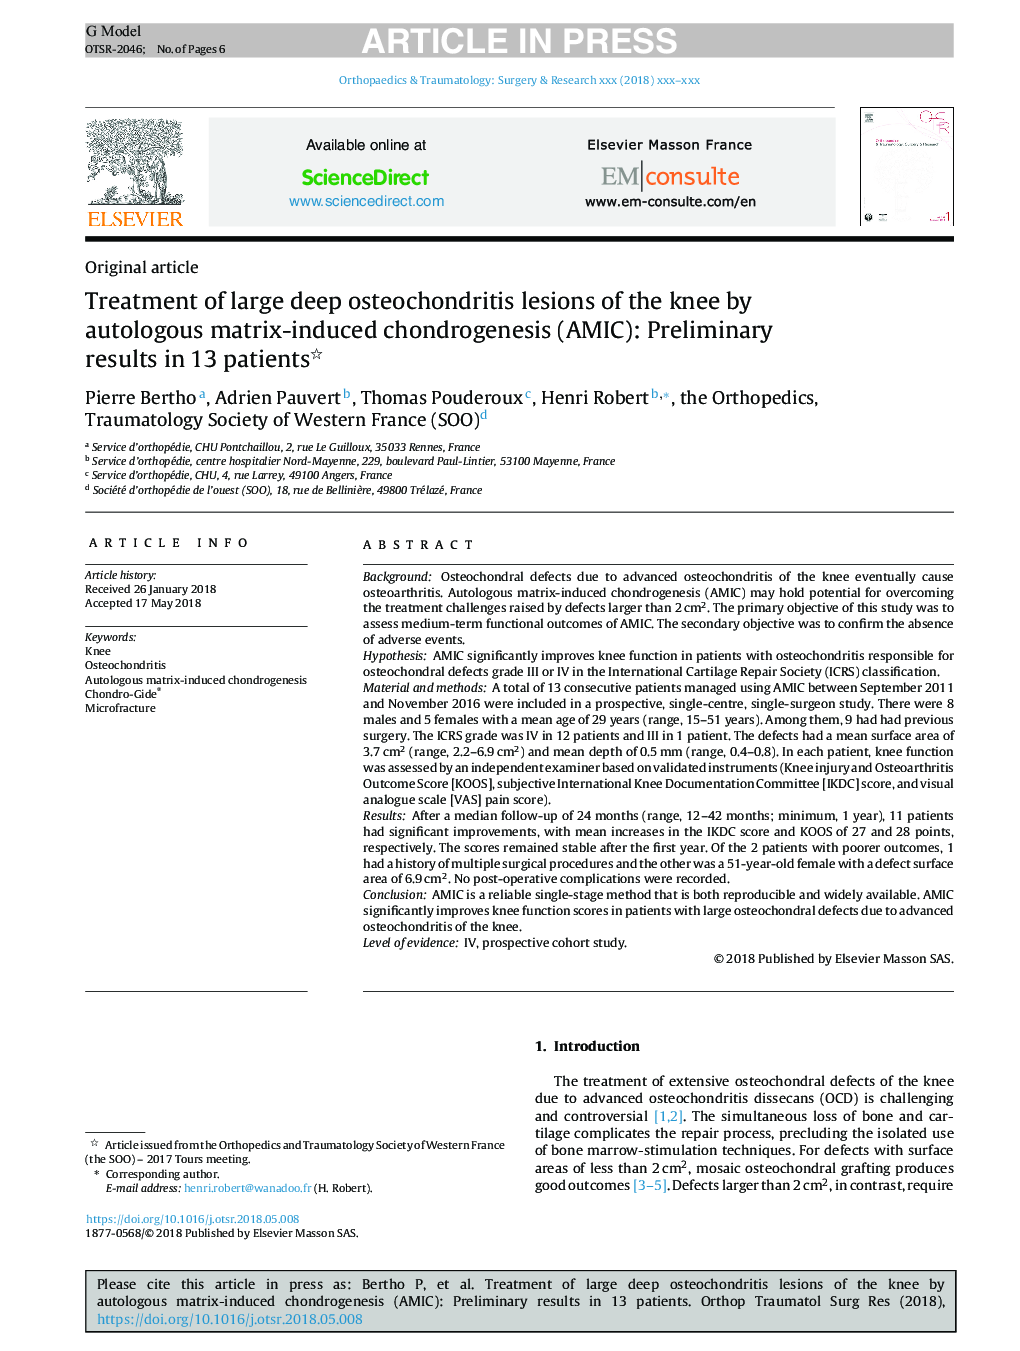 Treatment of large deep osteochondritis lesions of the knee by autologous matrix-induced chondrogenesis (AMIC): Preliminary results in 13 patients